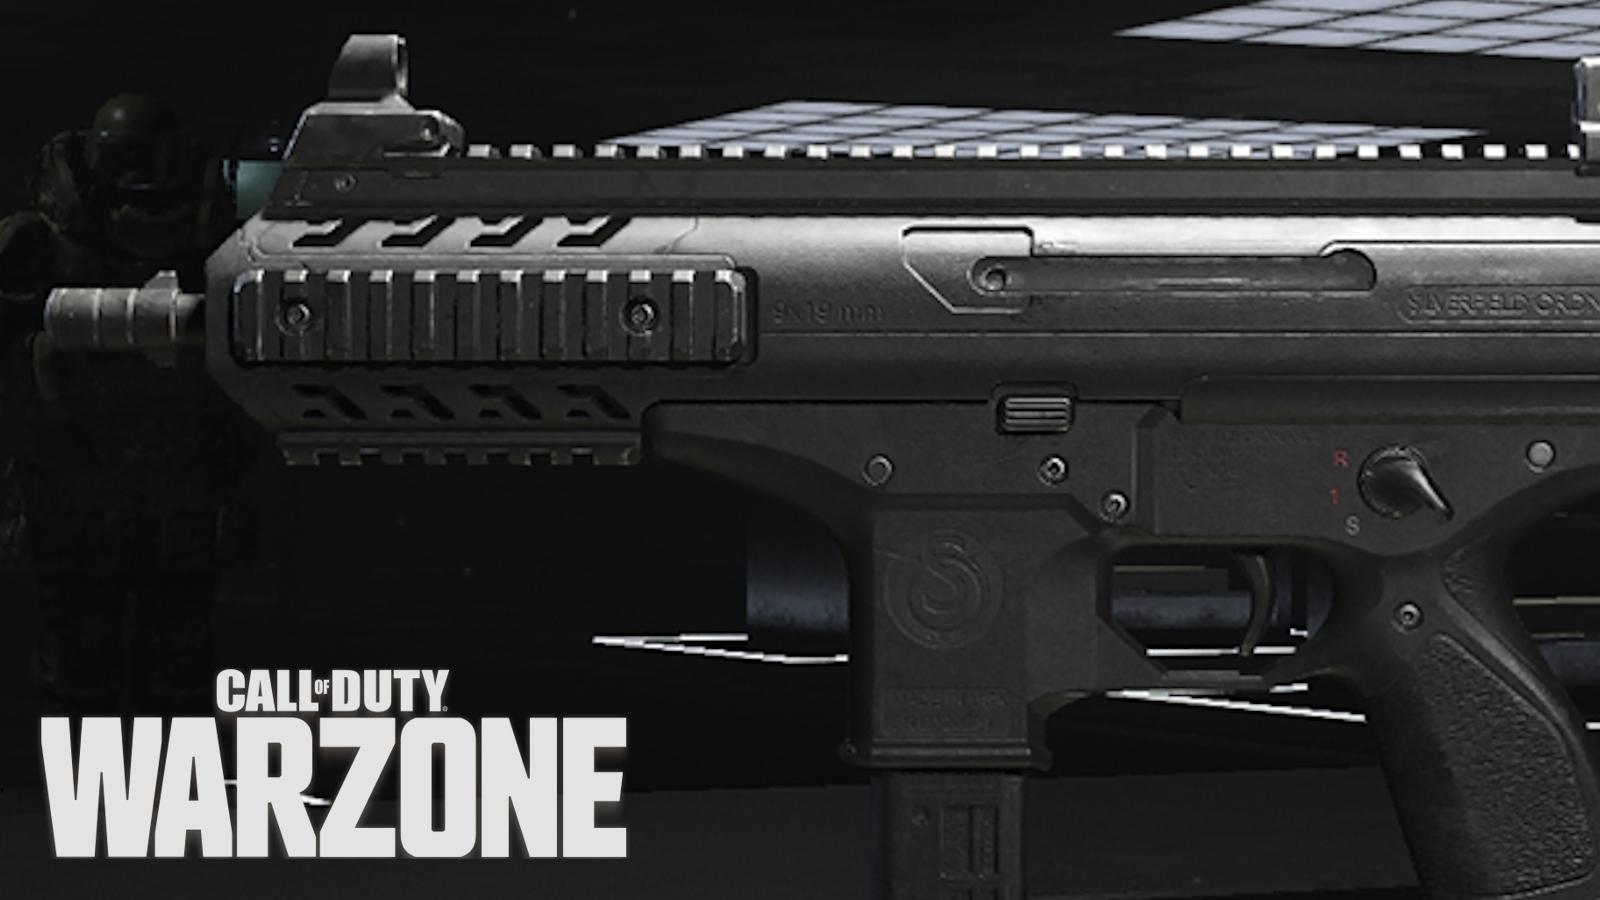 HRM-9 SMG with Warzone logo.